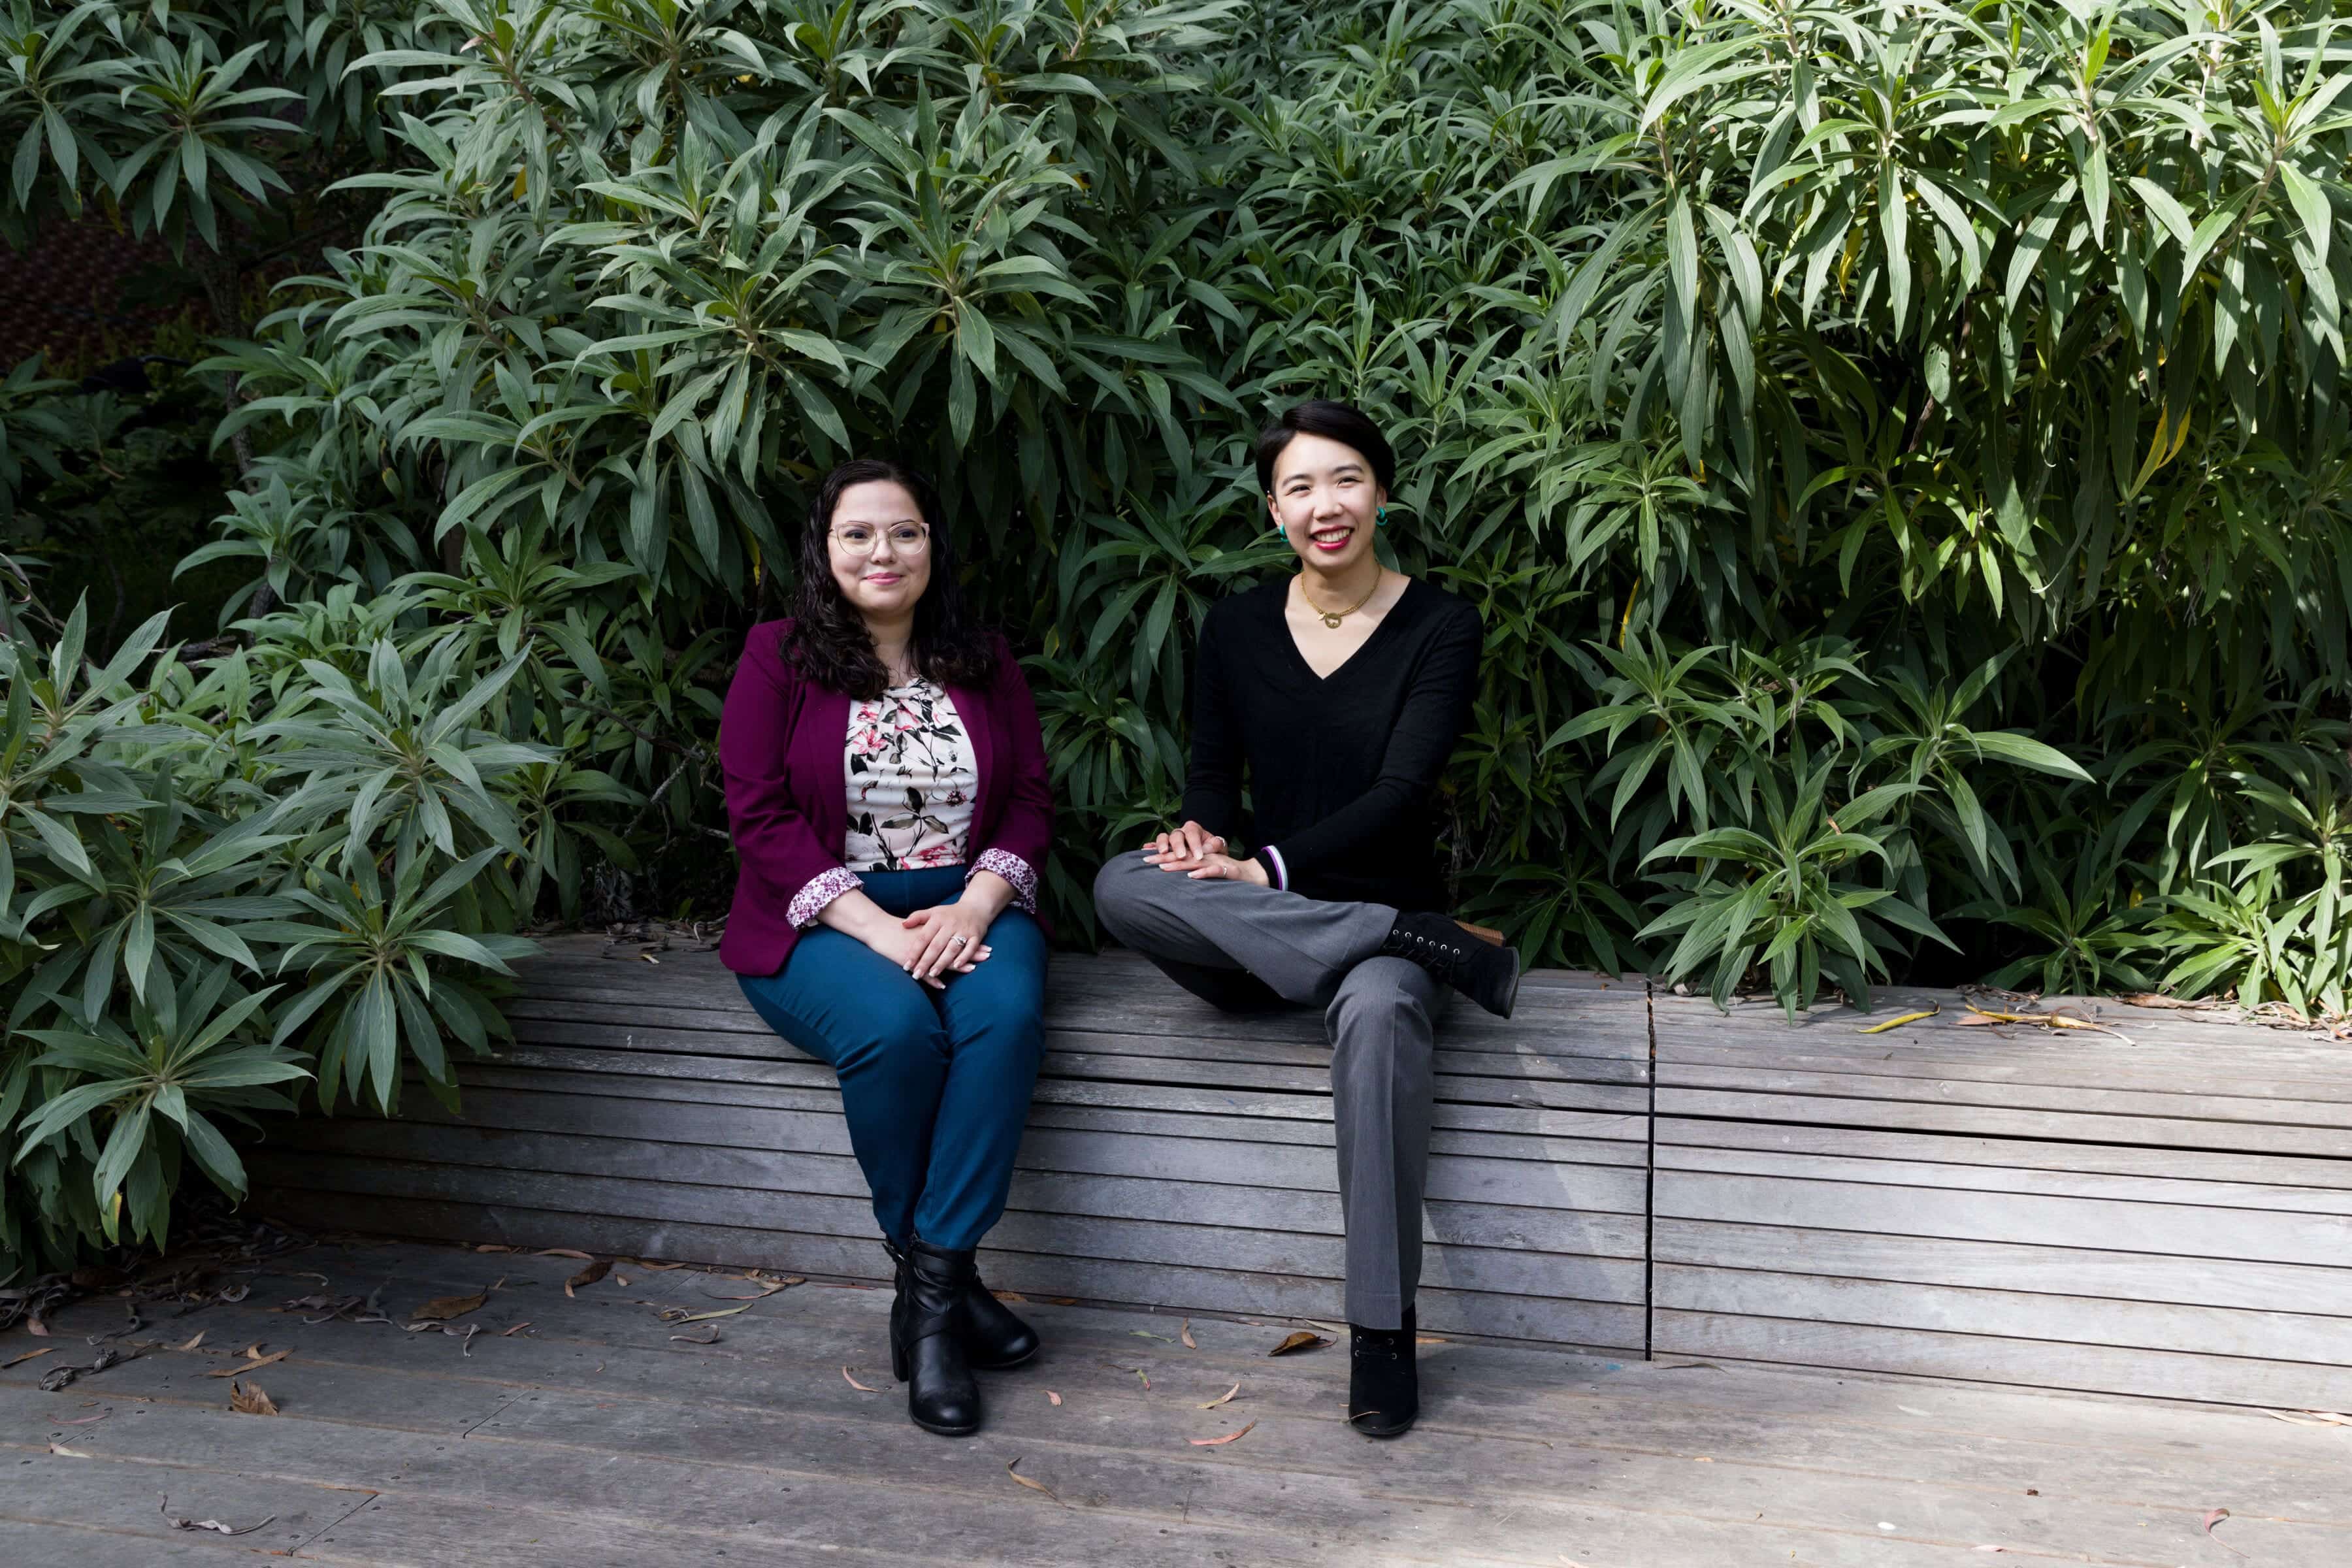 Trauma psychologist Dr. Alexis Lopez and San Francisco therapist Dr. Justine Fan relax on a park bench in Golden Gate Park.